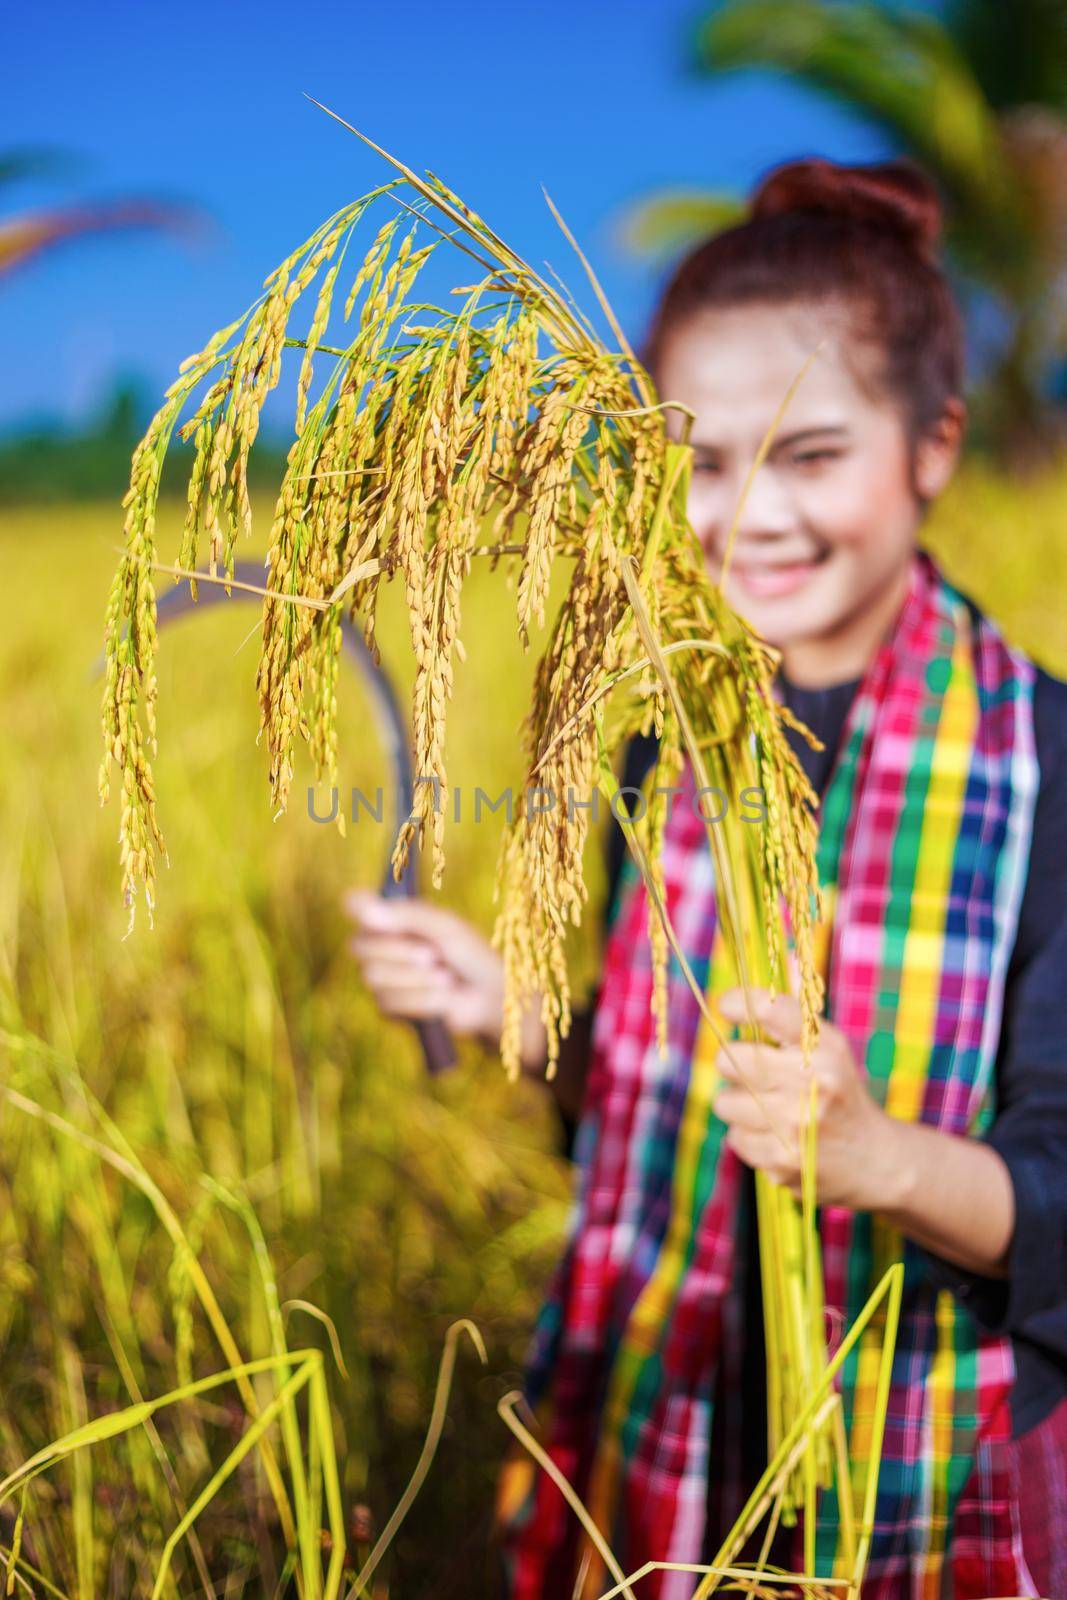 golden rice in hand of farmer woman, Thailand